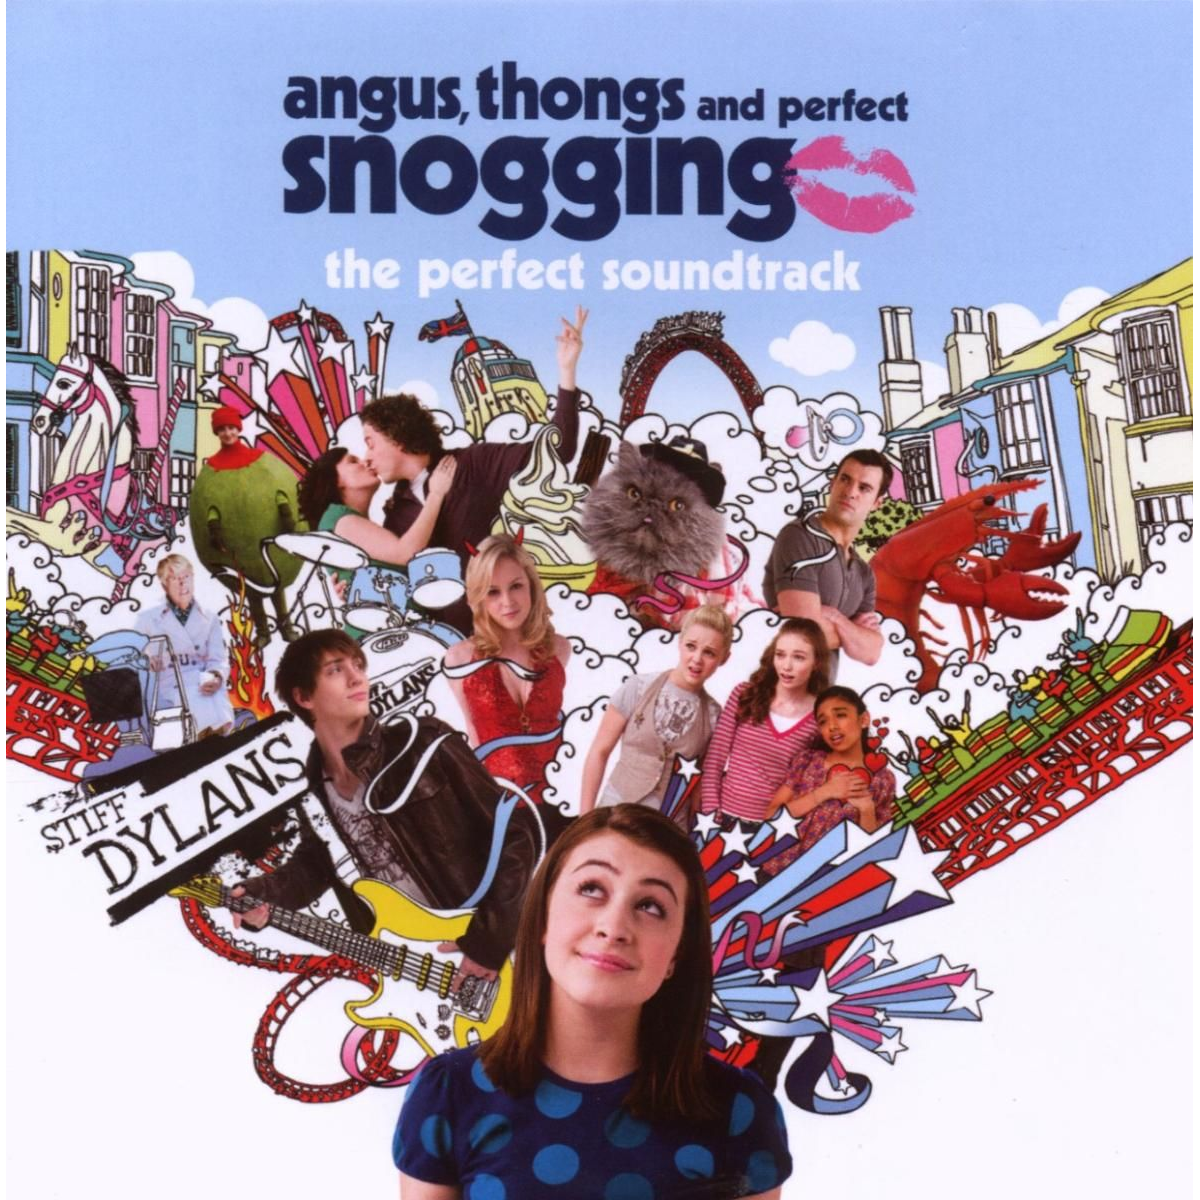 The album cover for Angus, Thongs and Perfect Snogging